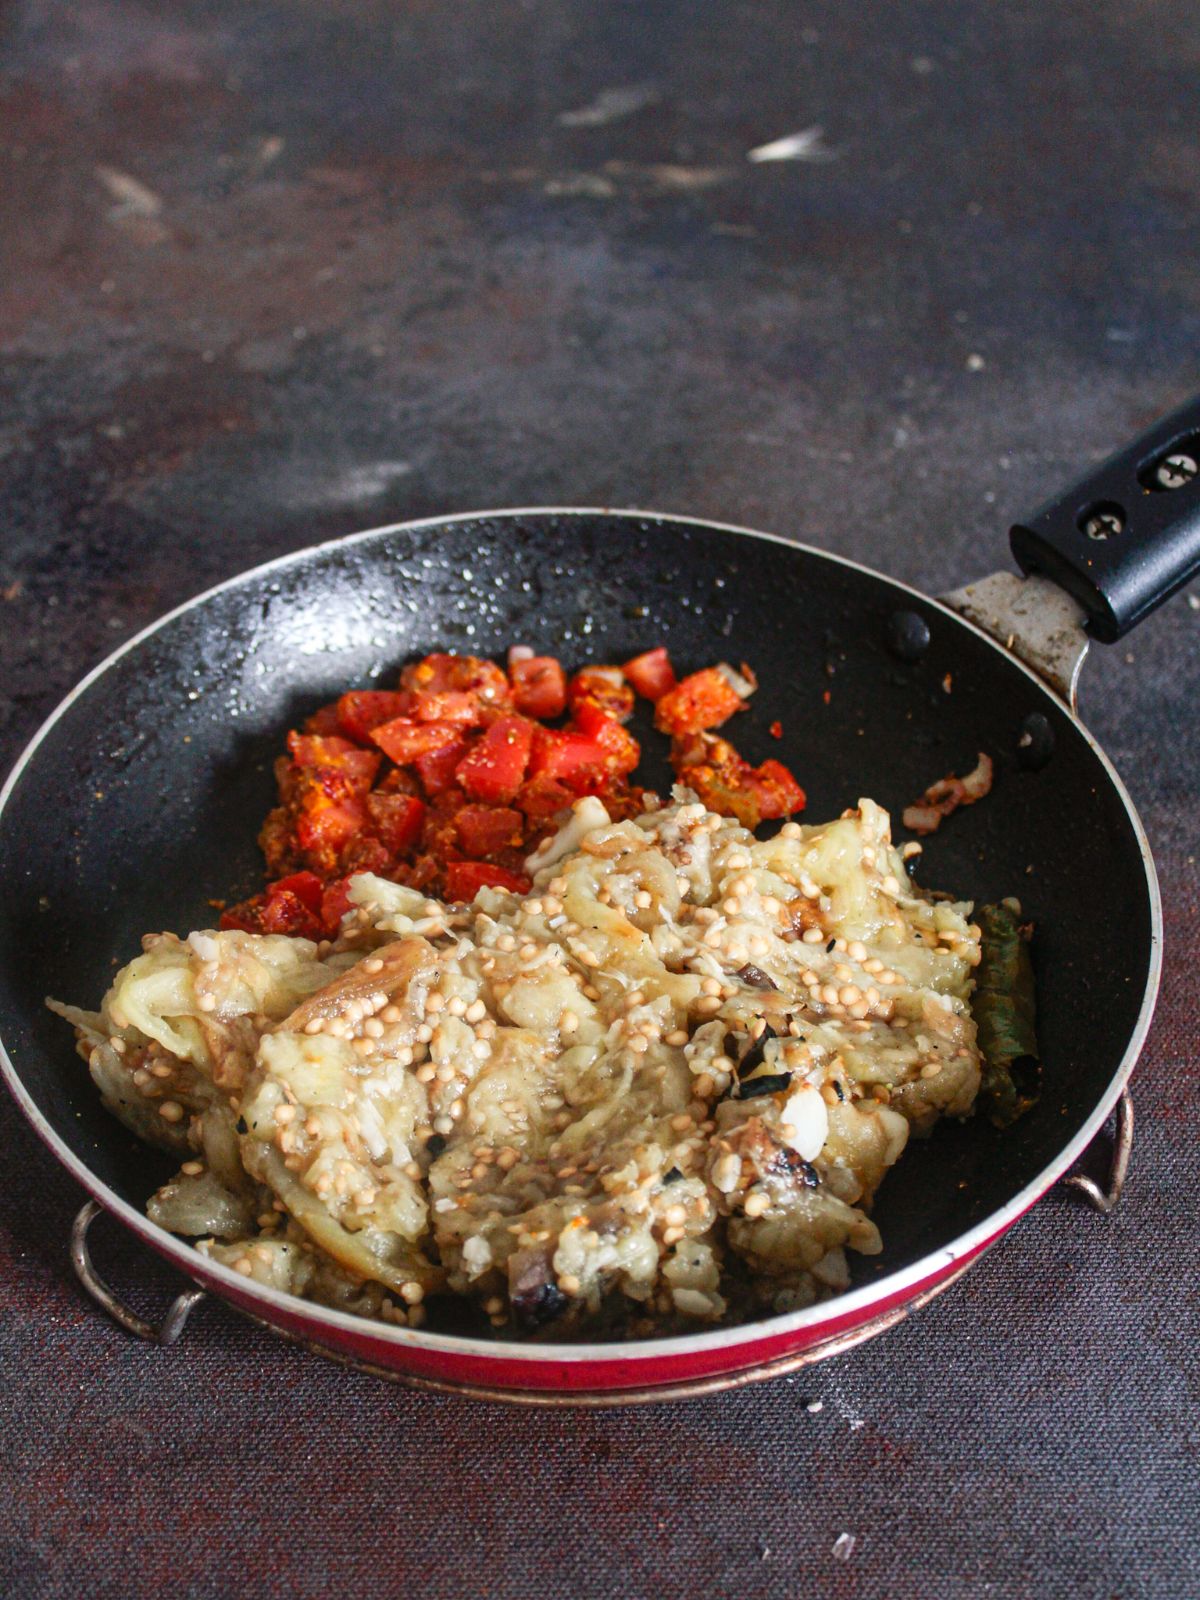 Eggplant mash in skillet with tomatoes